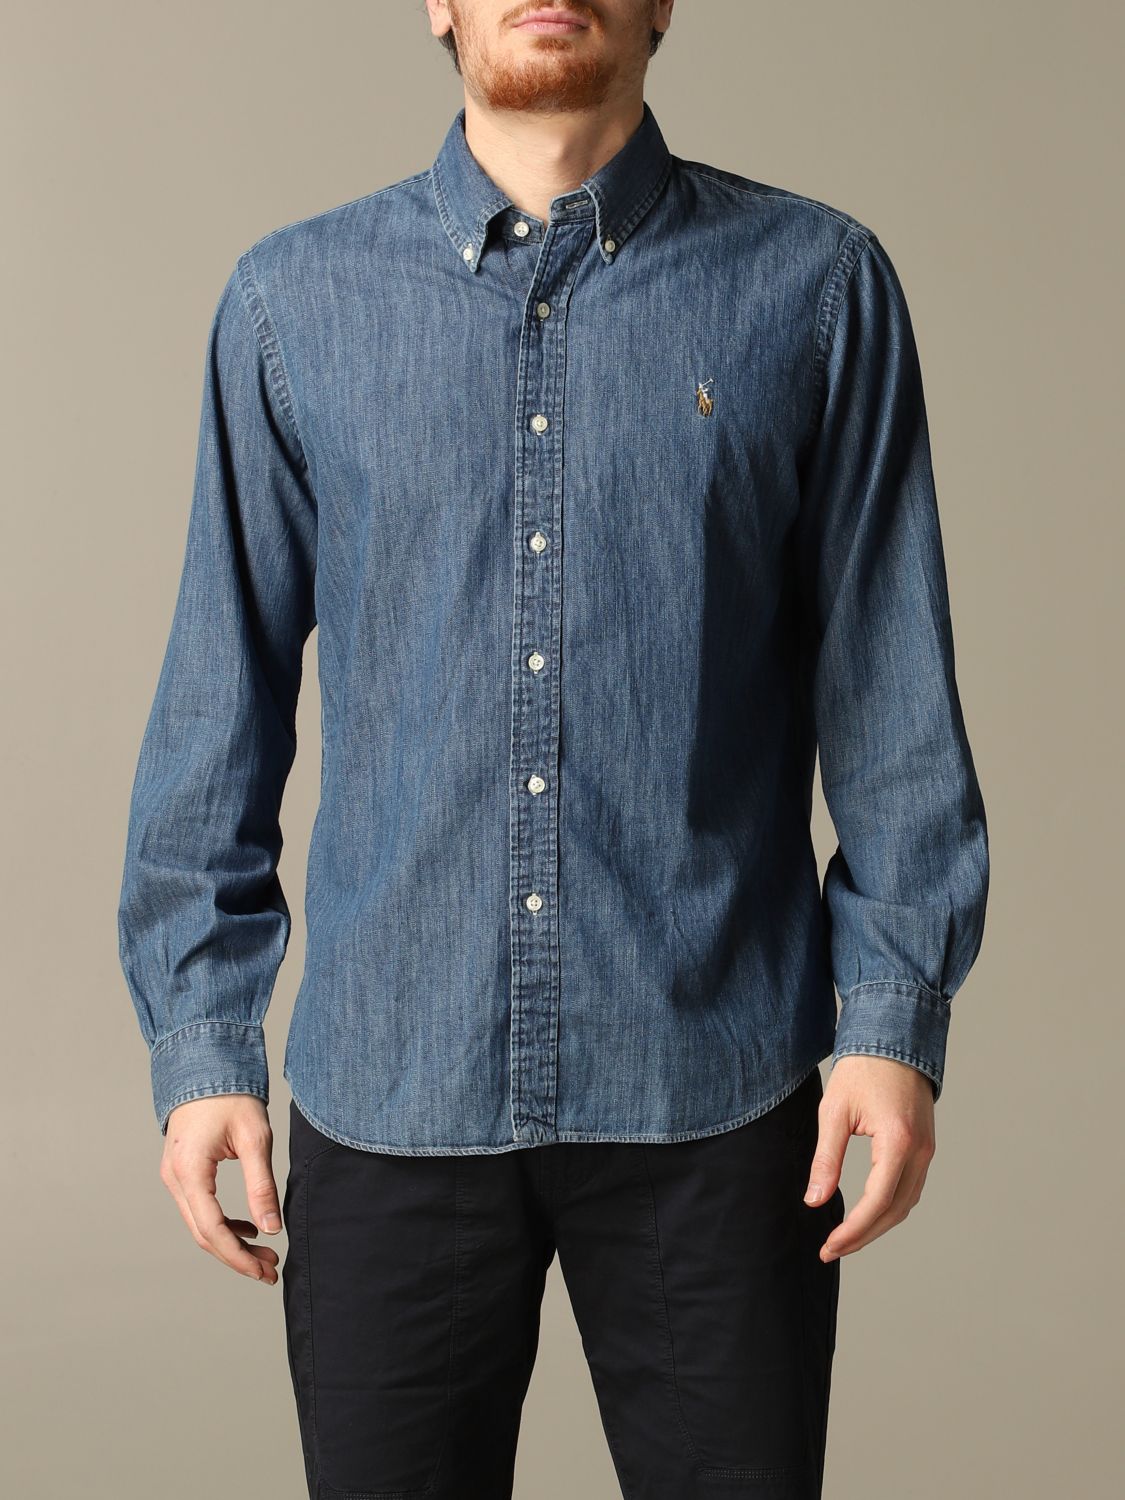 Polo Ralph Lauren Outlet: chambray shirt with logo - Denim | Polo Ralph  Lauren shirt 710792043 online on 